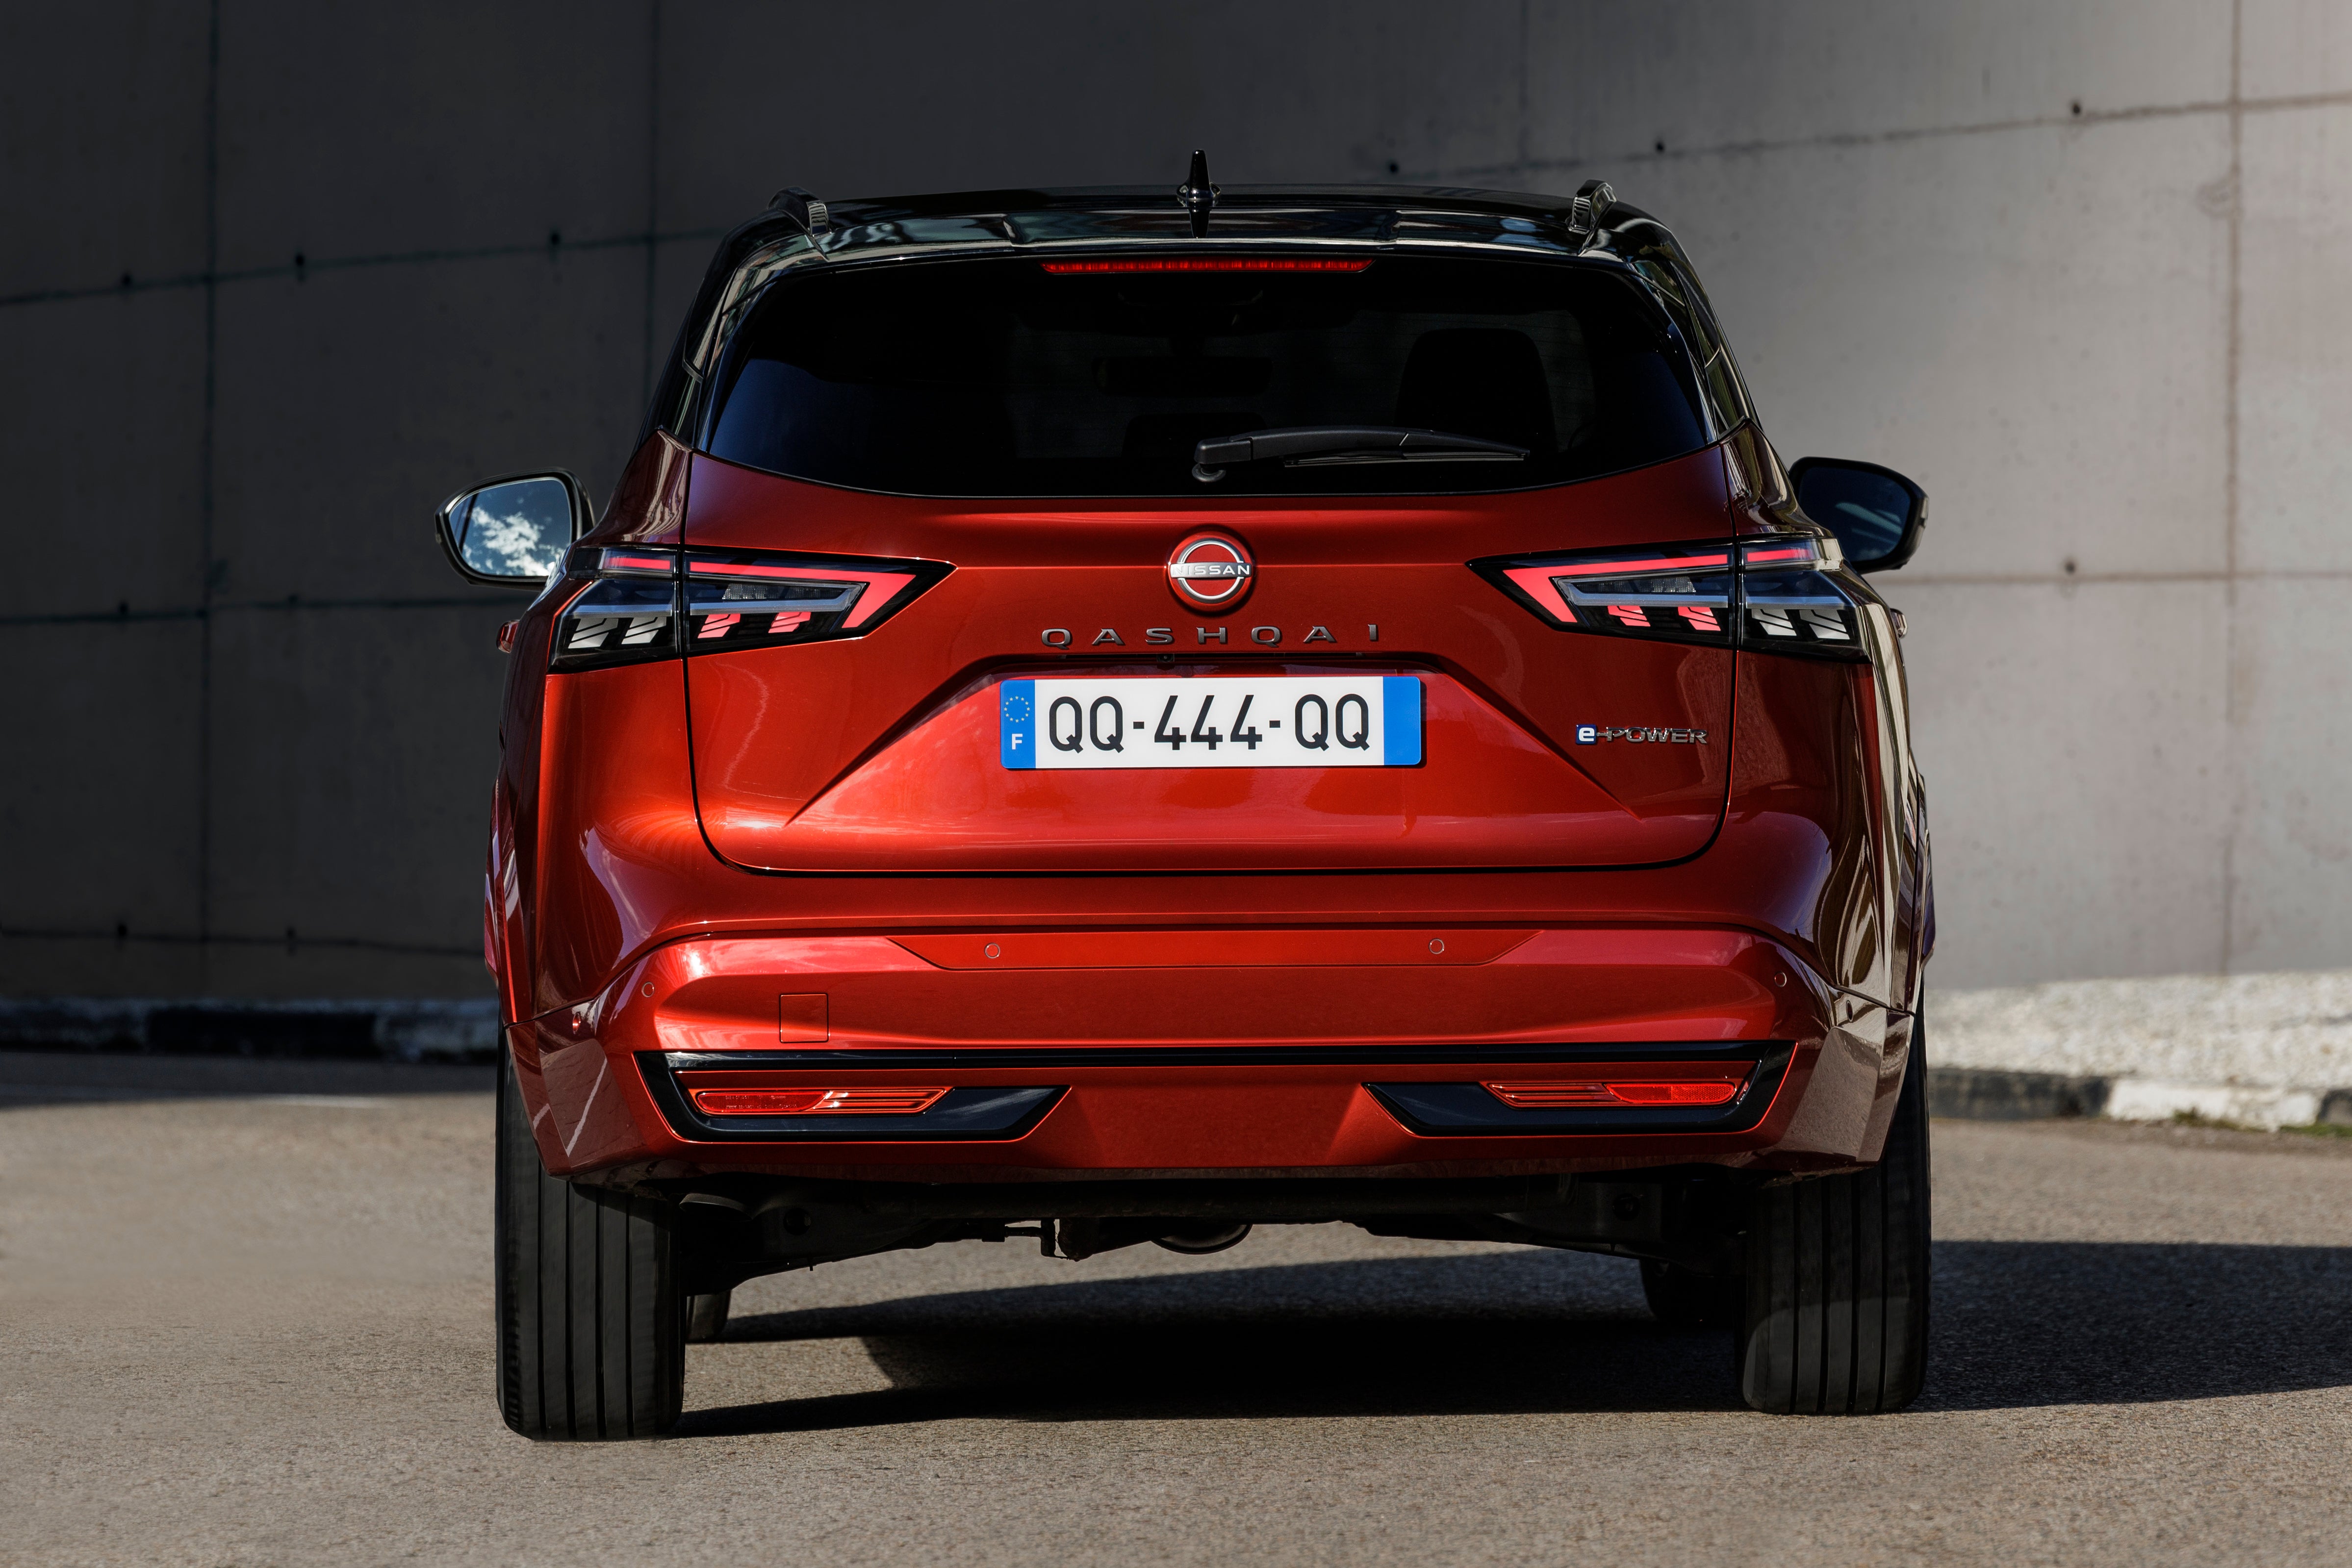 A hands-free auto-open electric tailgate increases the Qashqai's everyday usability